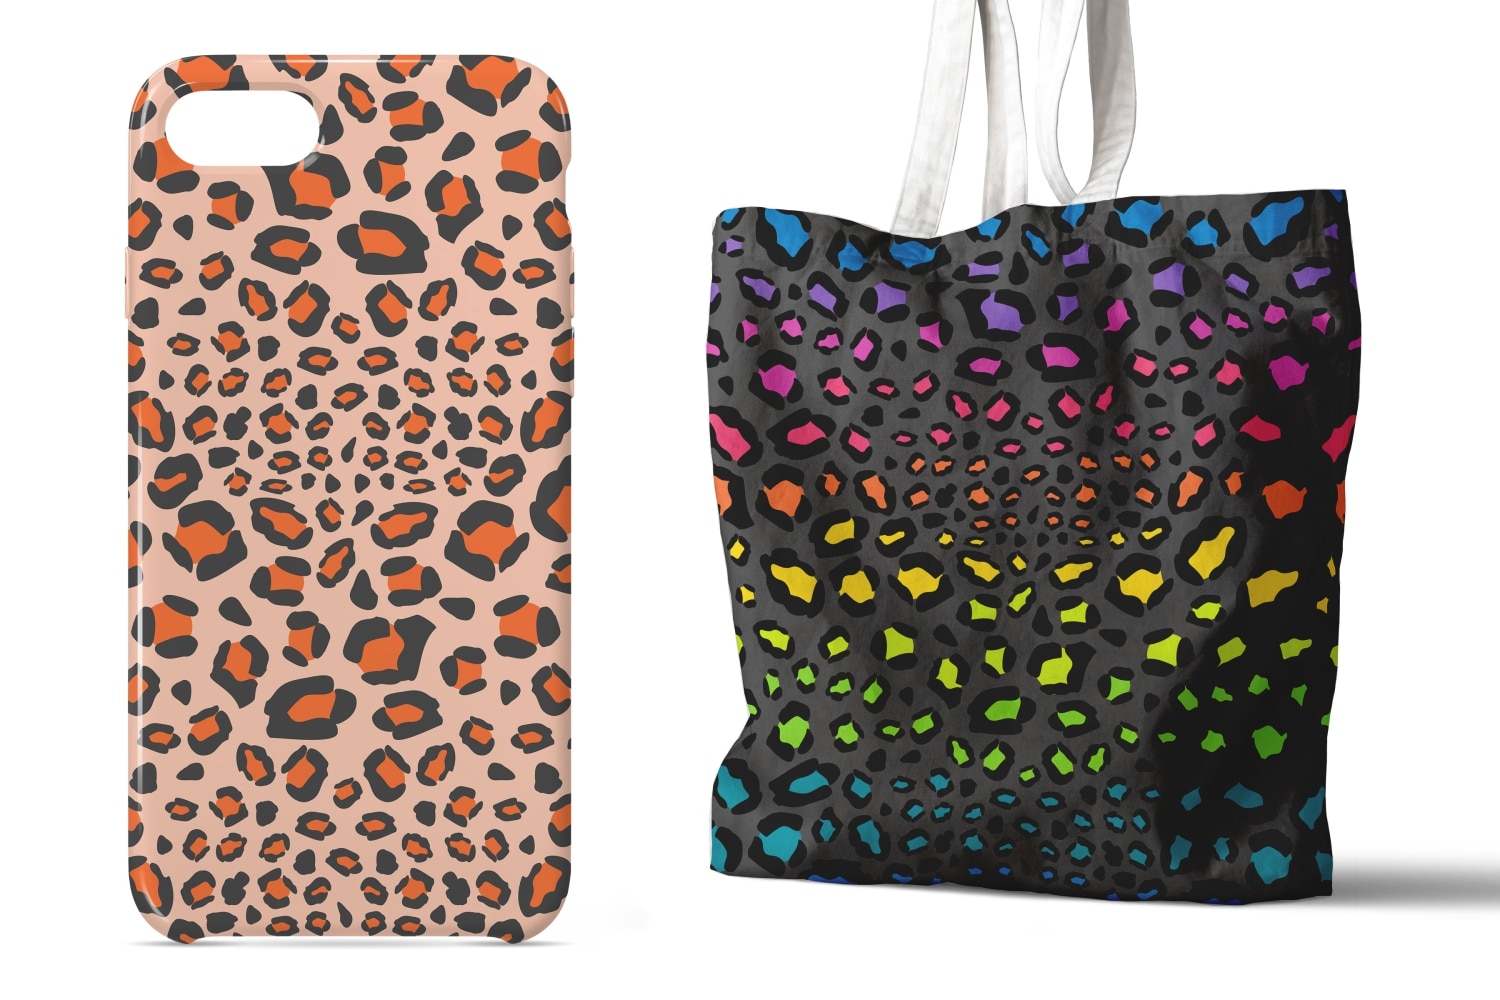 Assorted Seamless Leopard Print Images